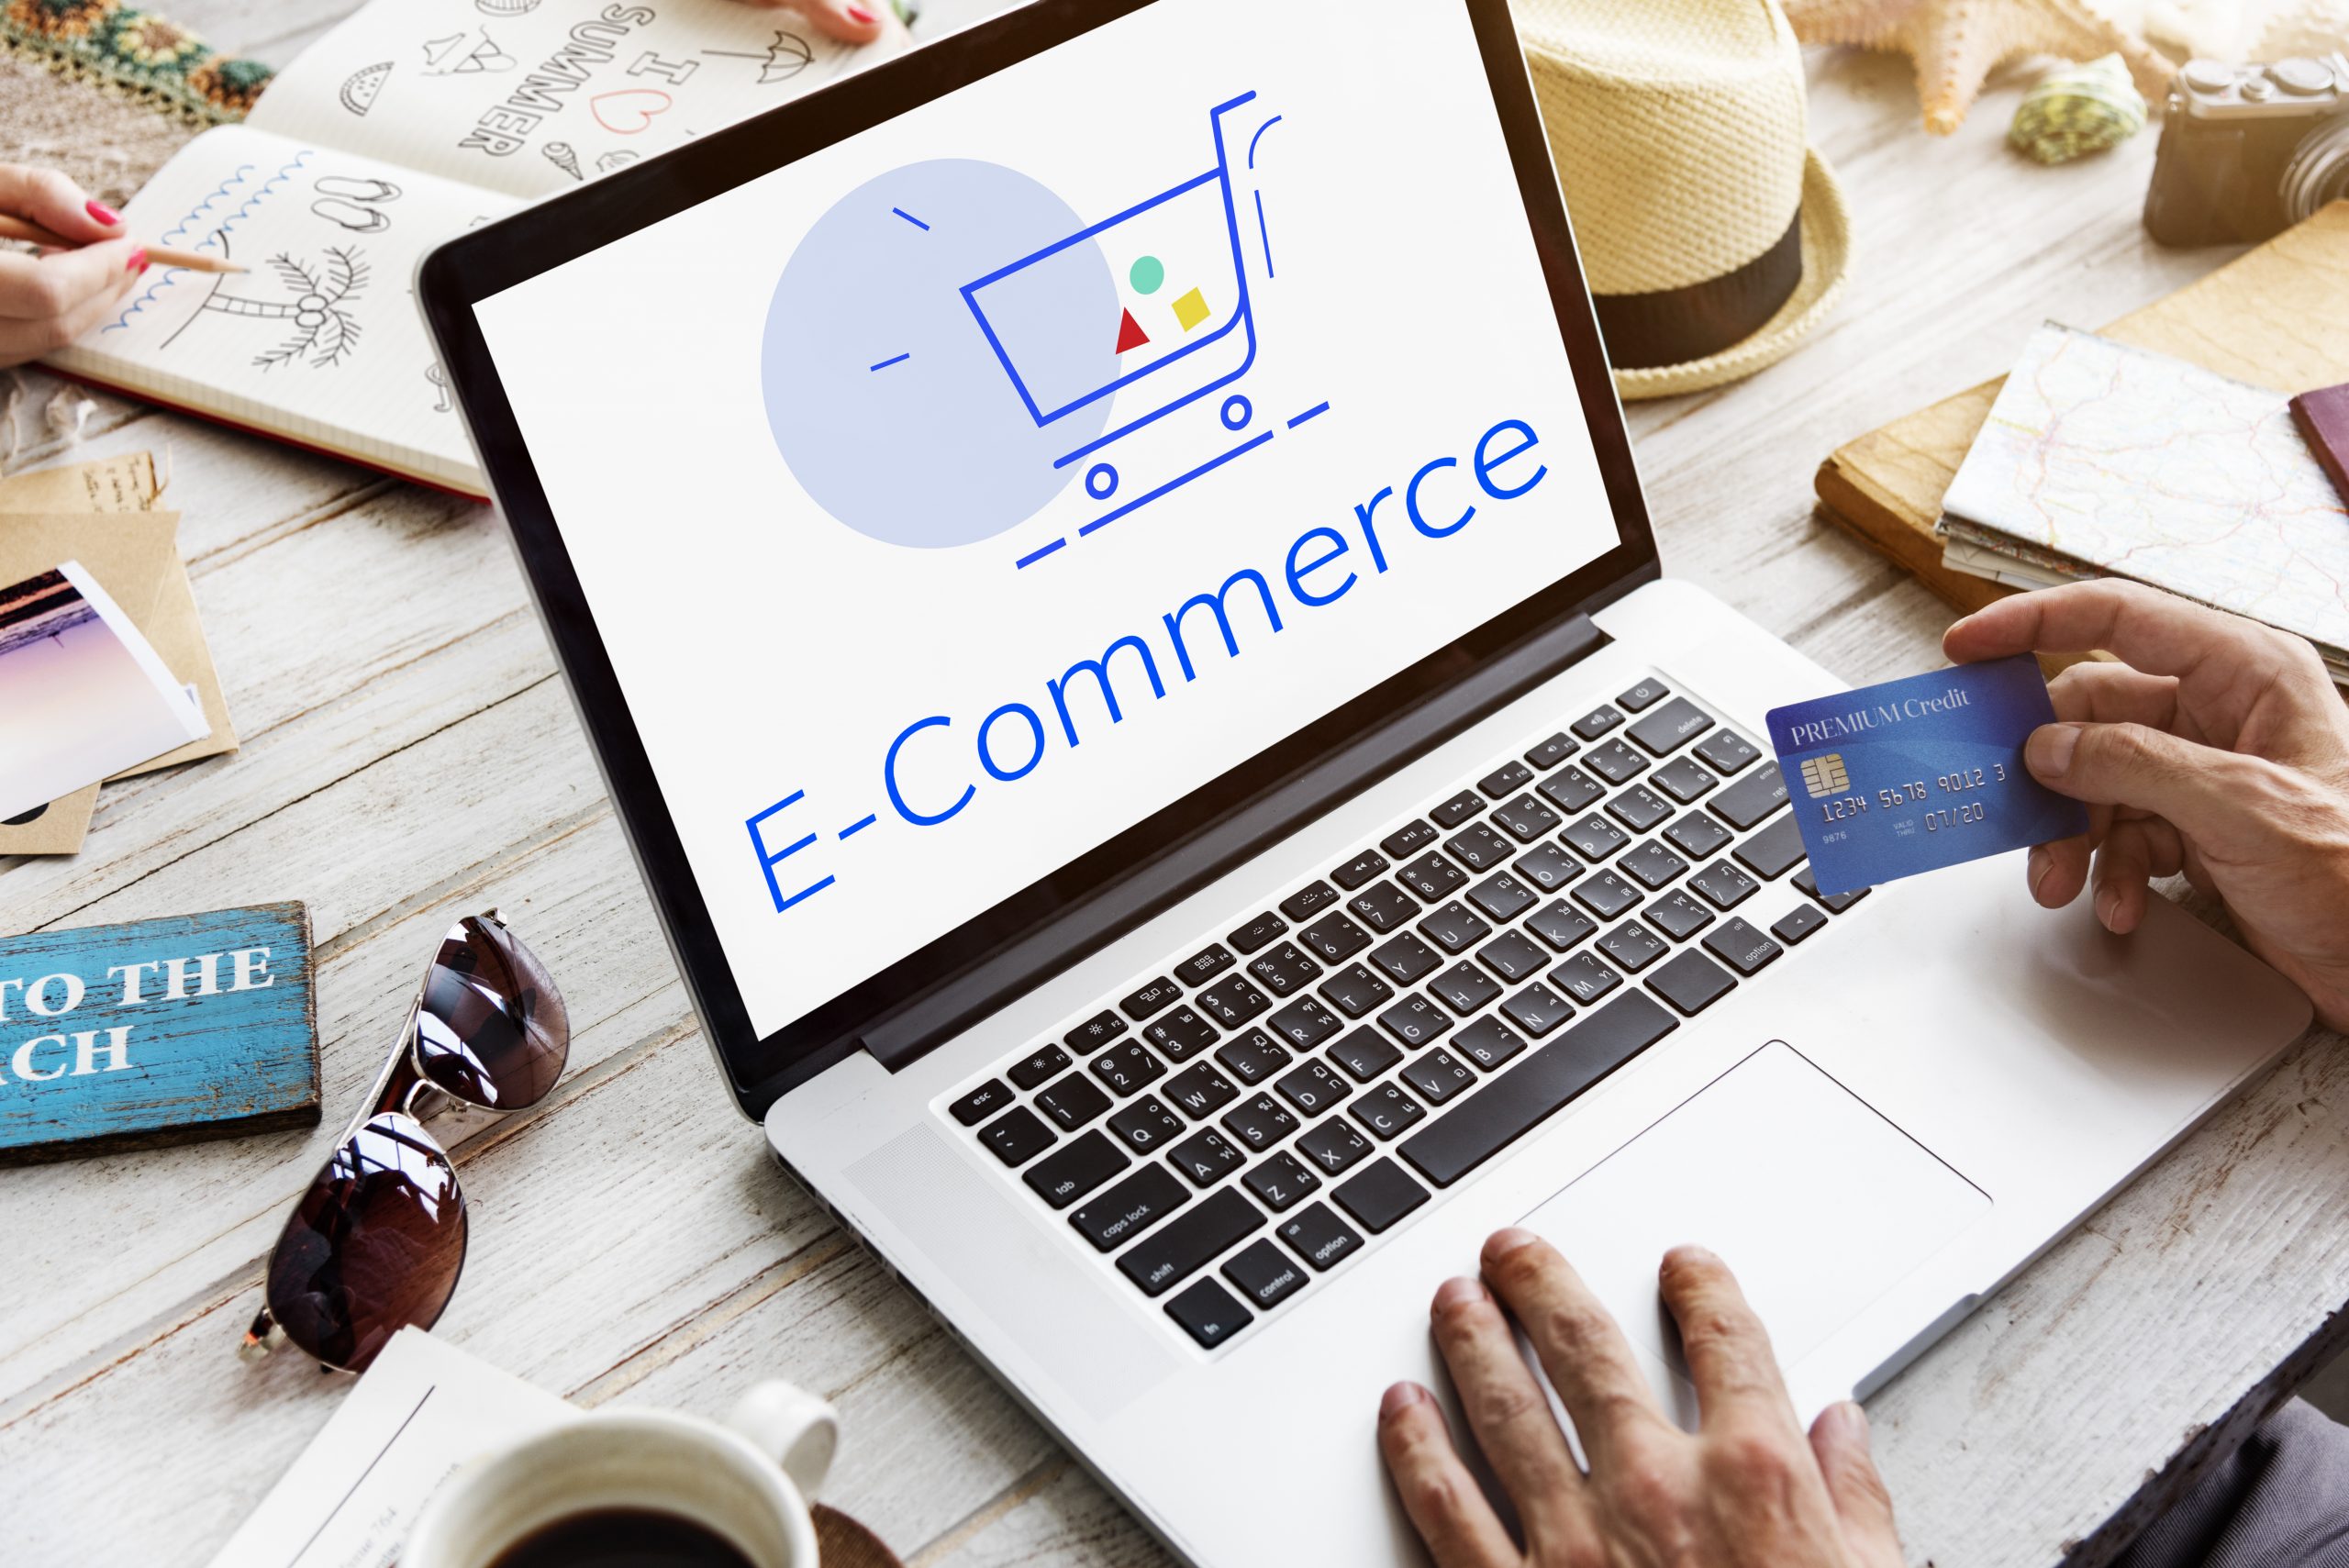 Winning the Ecommerce Game: Innovative Digital Marketing Strategies for Online Retailers